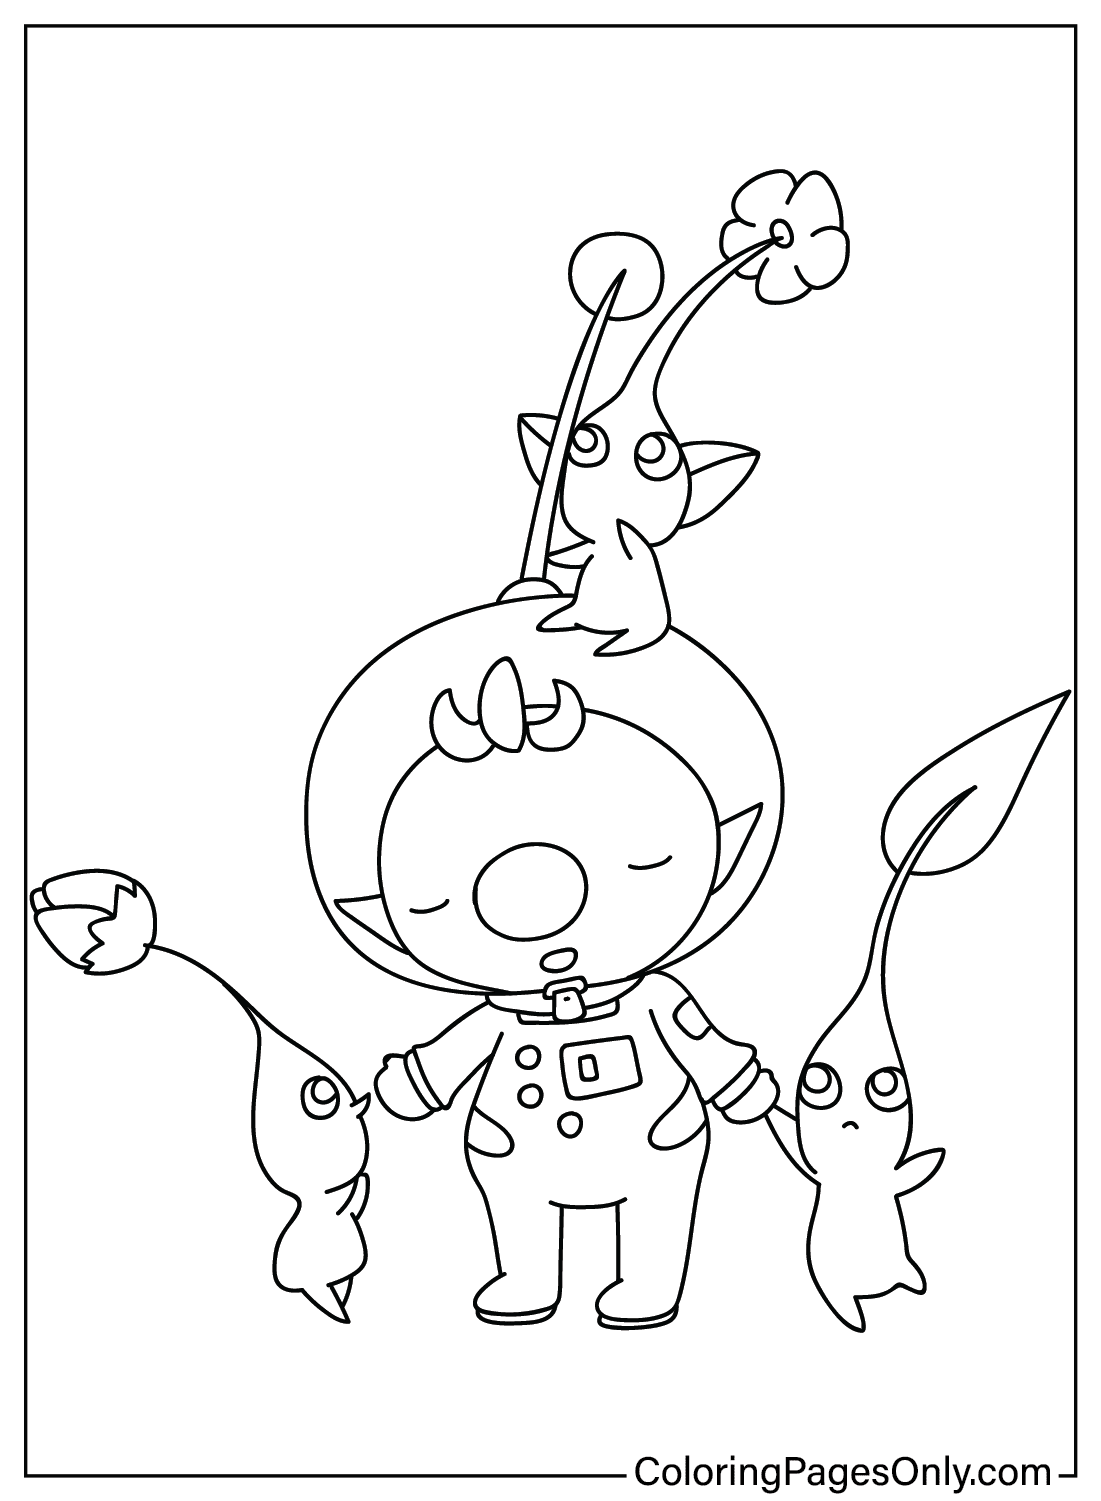 Printable Pikmin Coloring Page from Pikmin